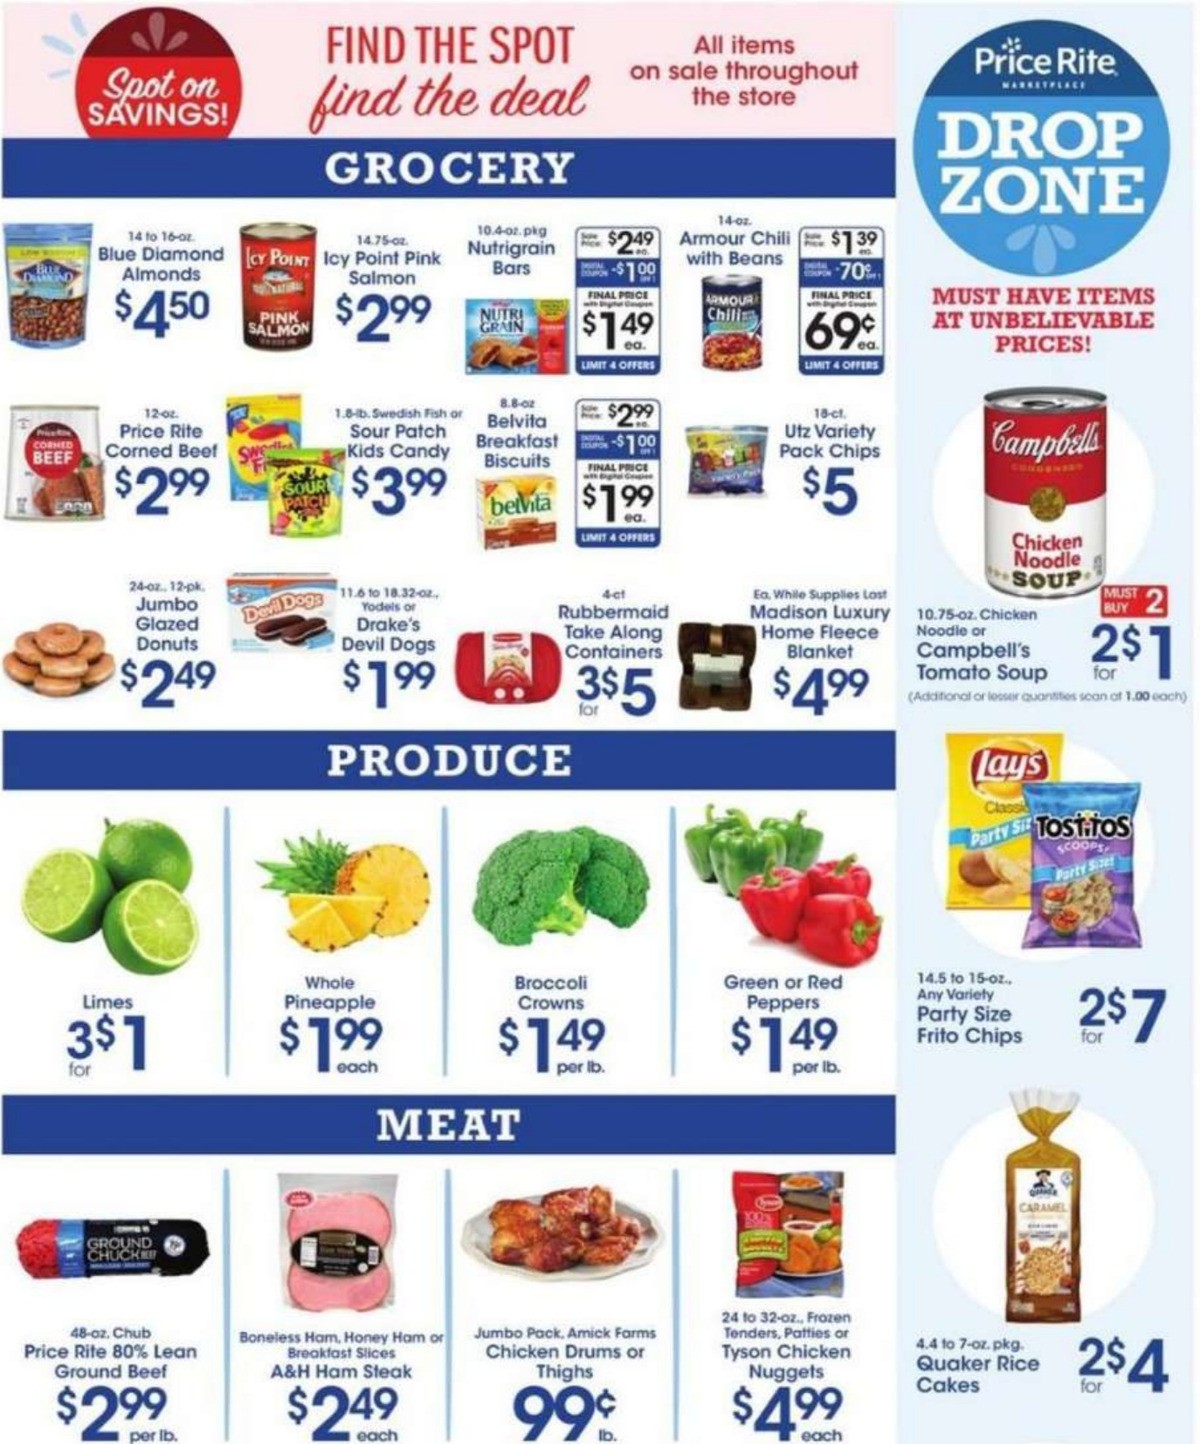 Price Rite Weekly Ad from January 1